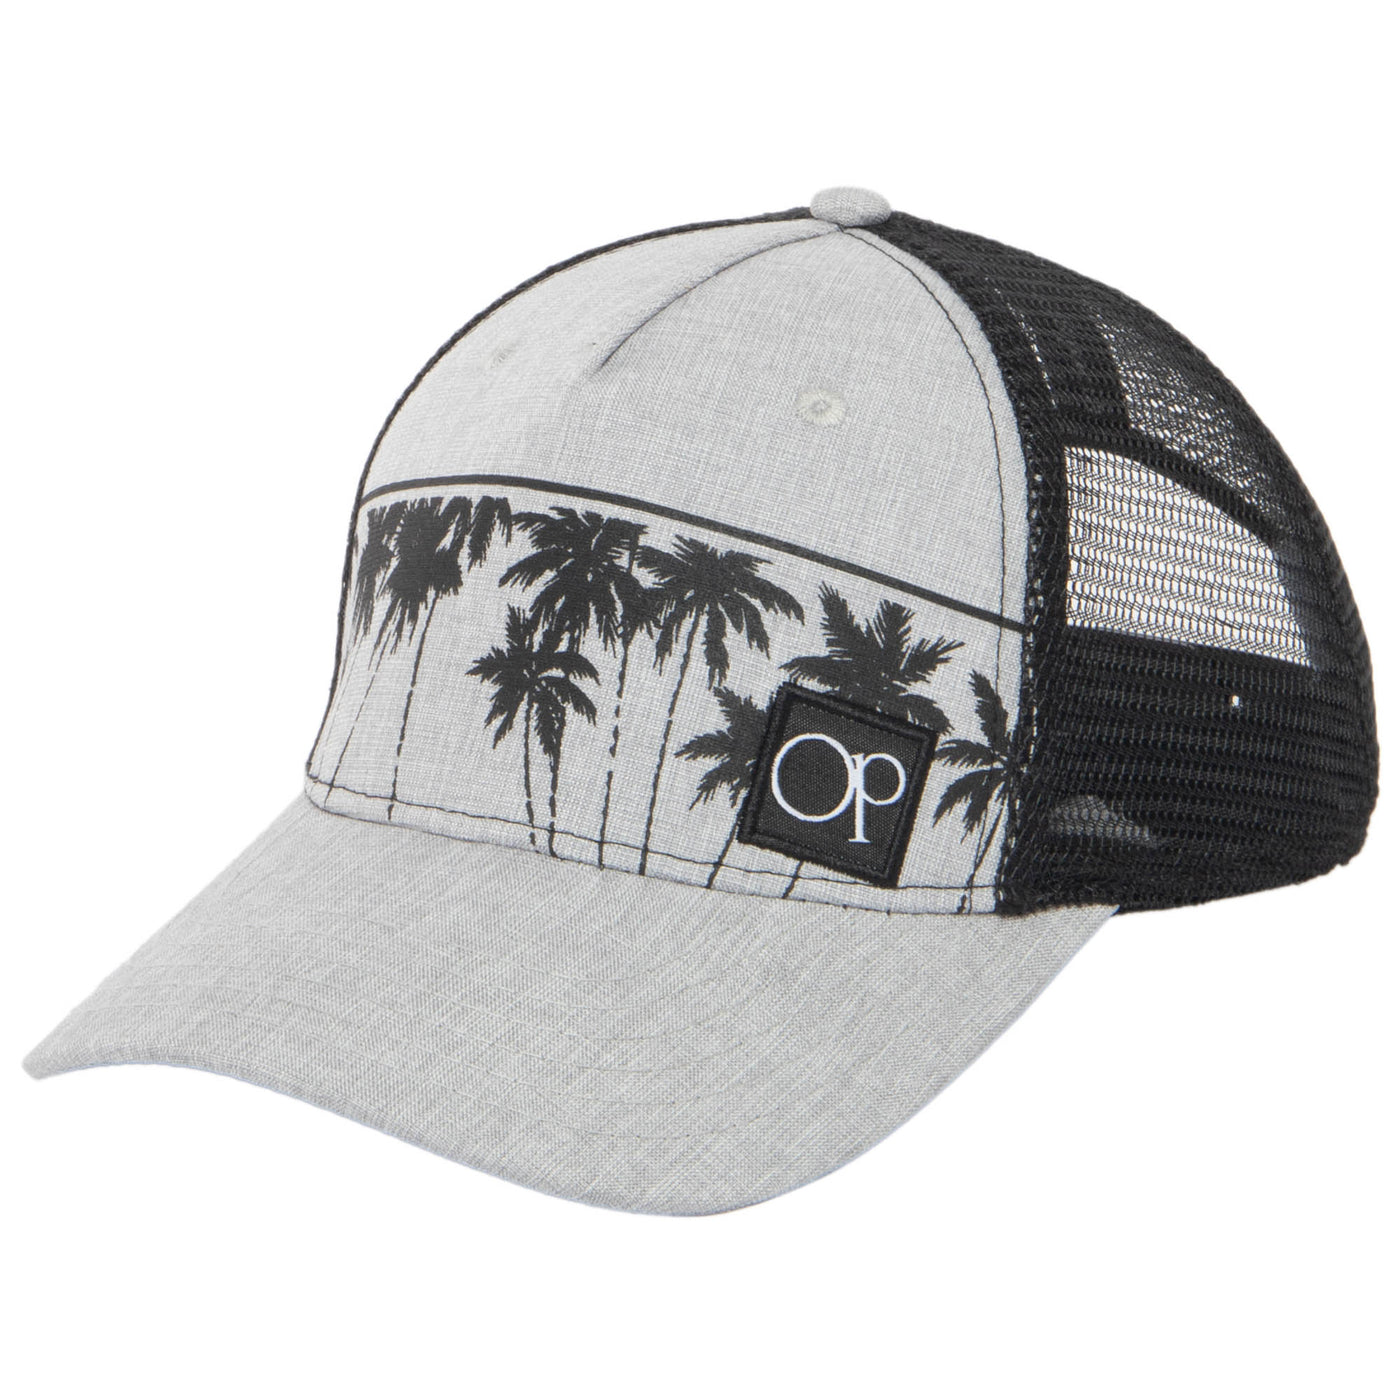 Ocean Pacific - 5 Panel Trucker Hat with Grey Palm Leaf Print-Trucker-San Diego Hat Company